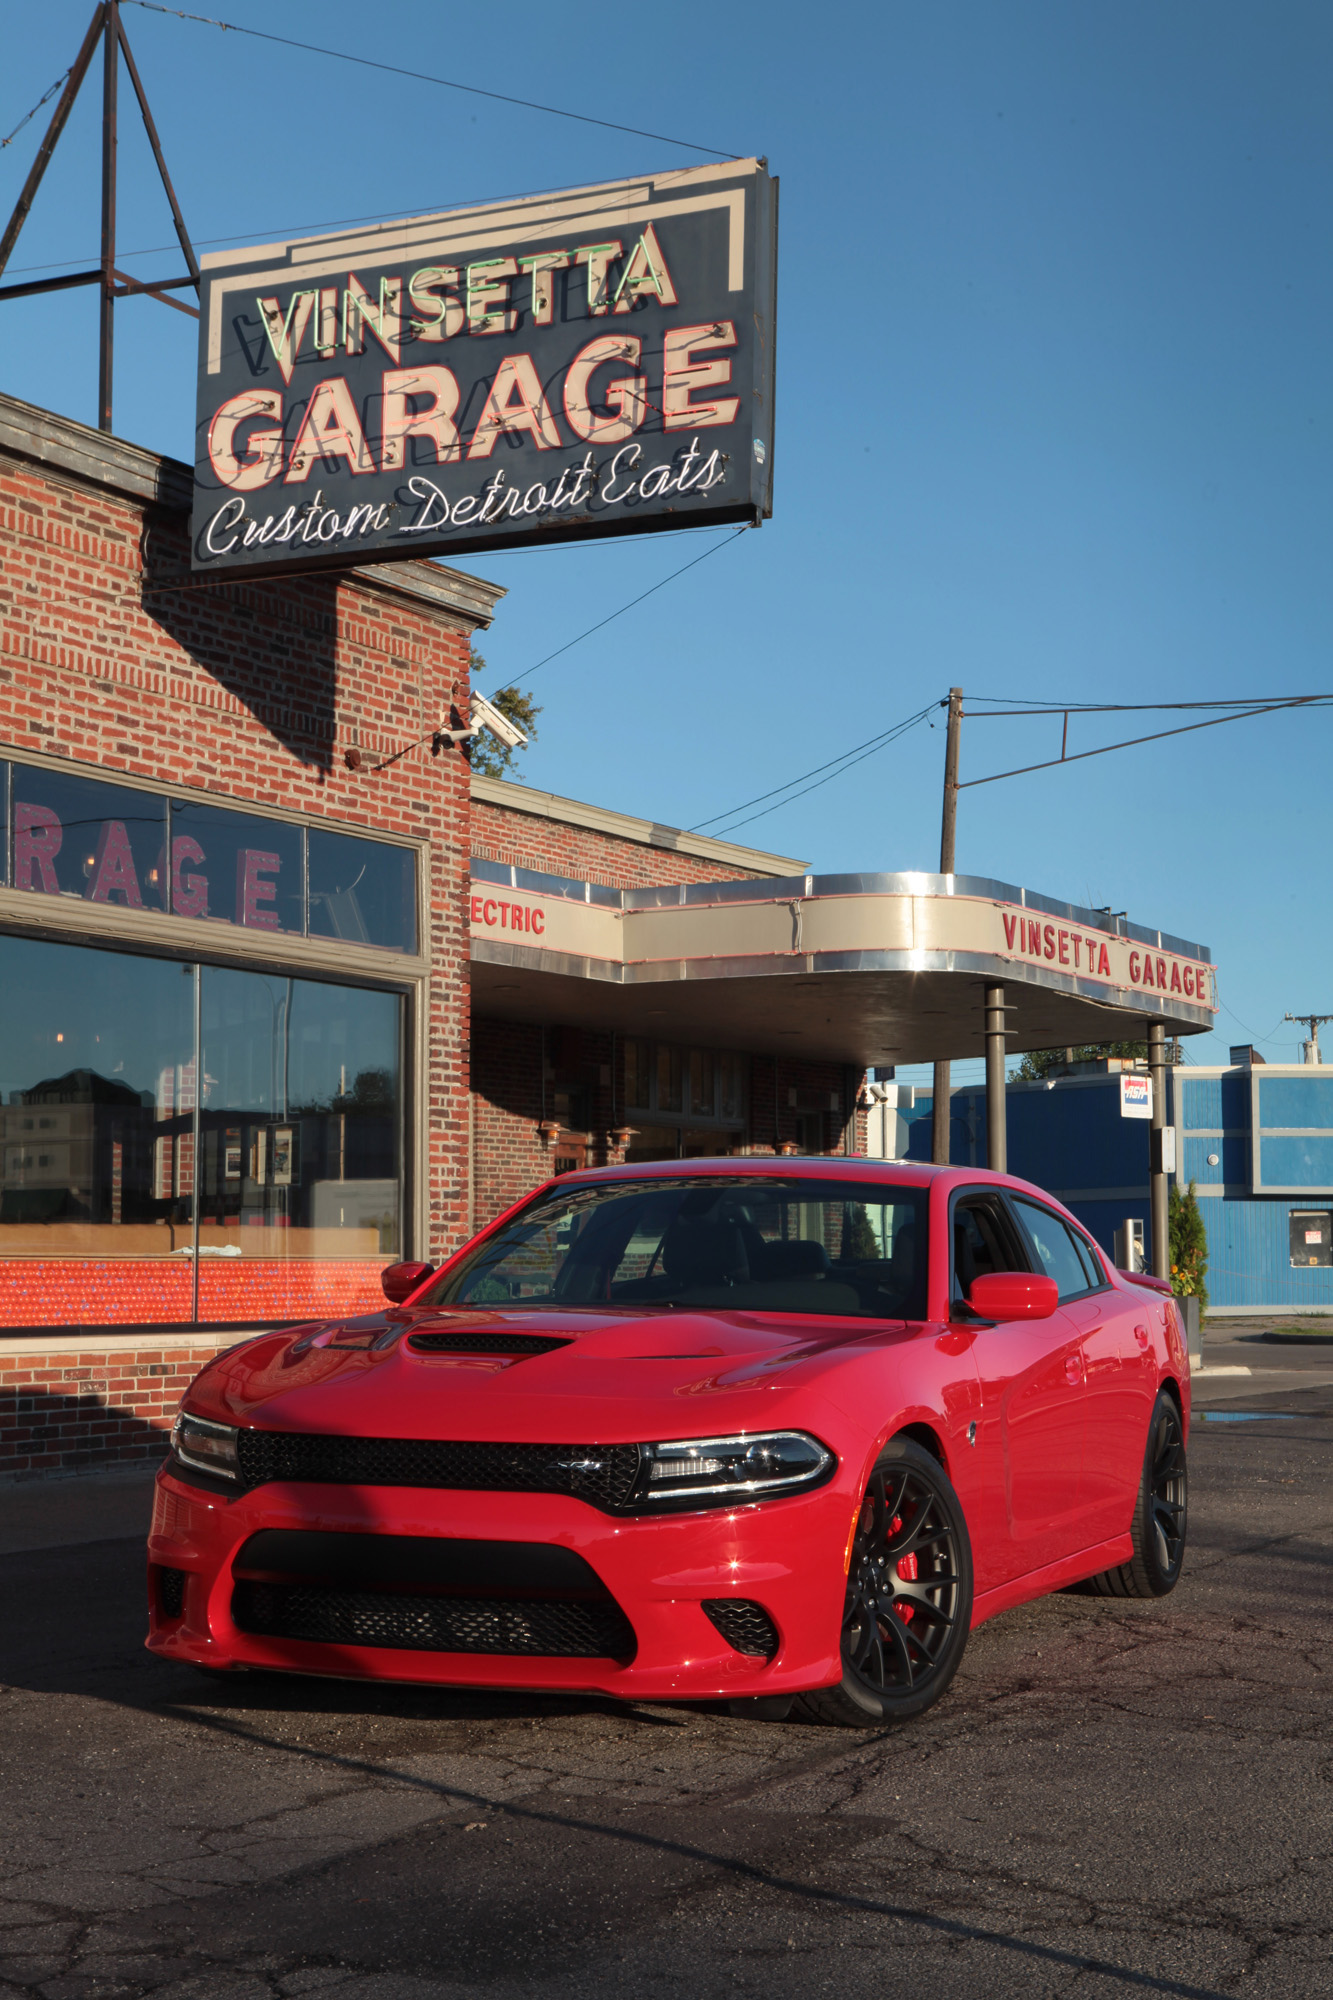 Dodge Kicks off Woodward Dream Cruise Unveiling the New 2015 Dodge Charger SRT Hellcat – the Quickest, Fastest and Most Powerful Sedan in The World